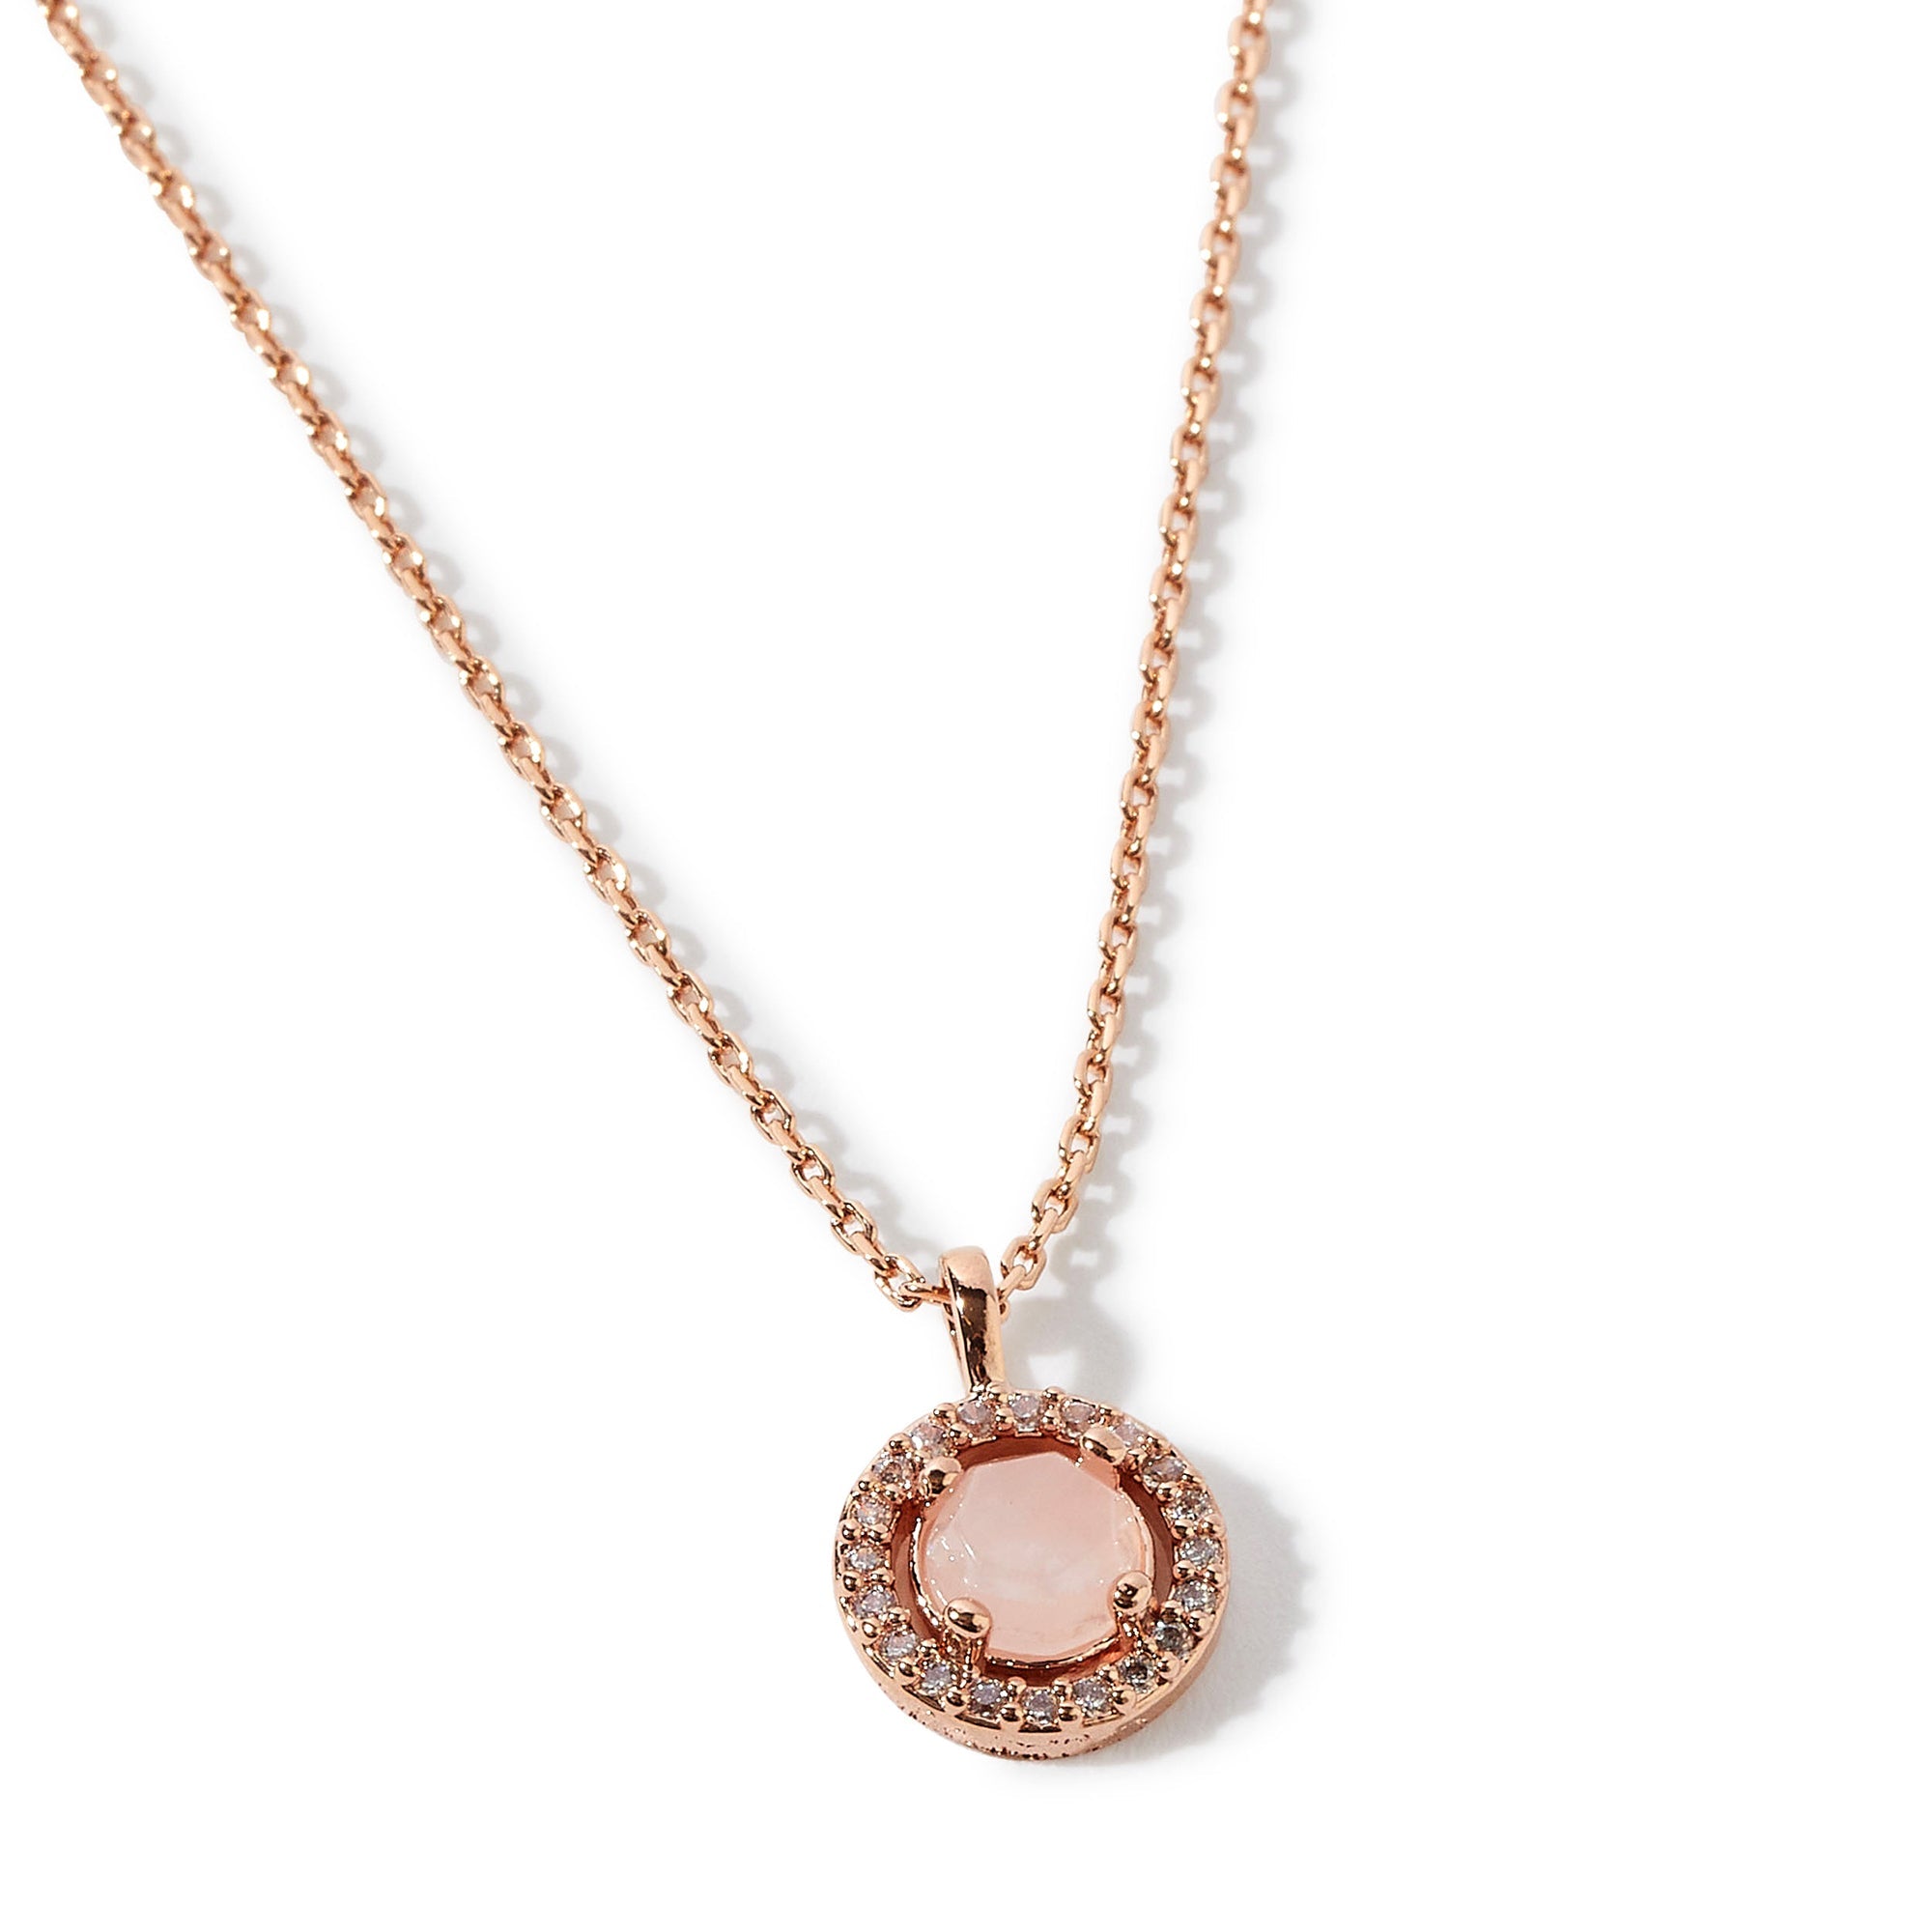 Real Gold Plated Rose Quartz Halo Pendant Necklace For Women By Accessorize London